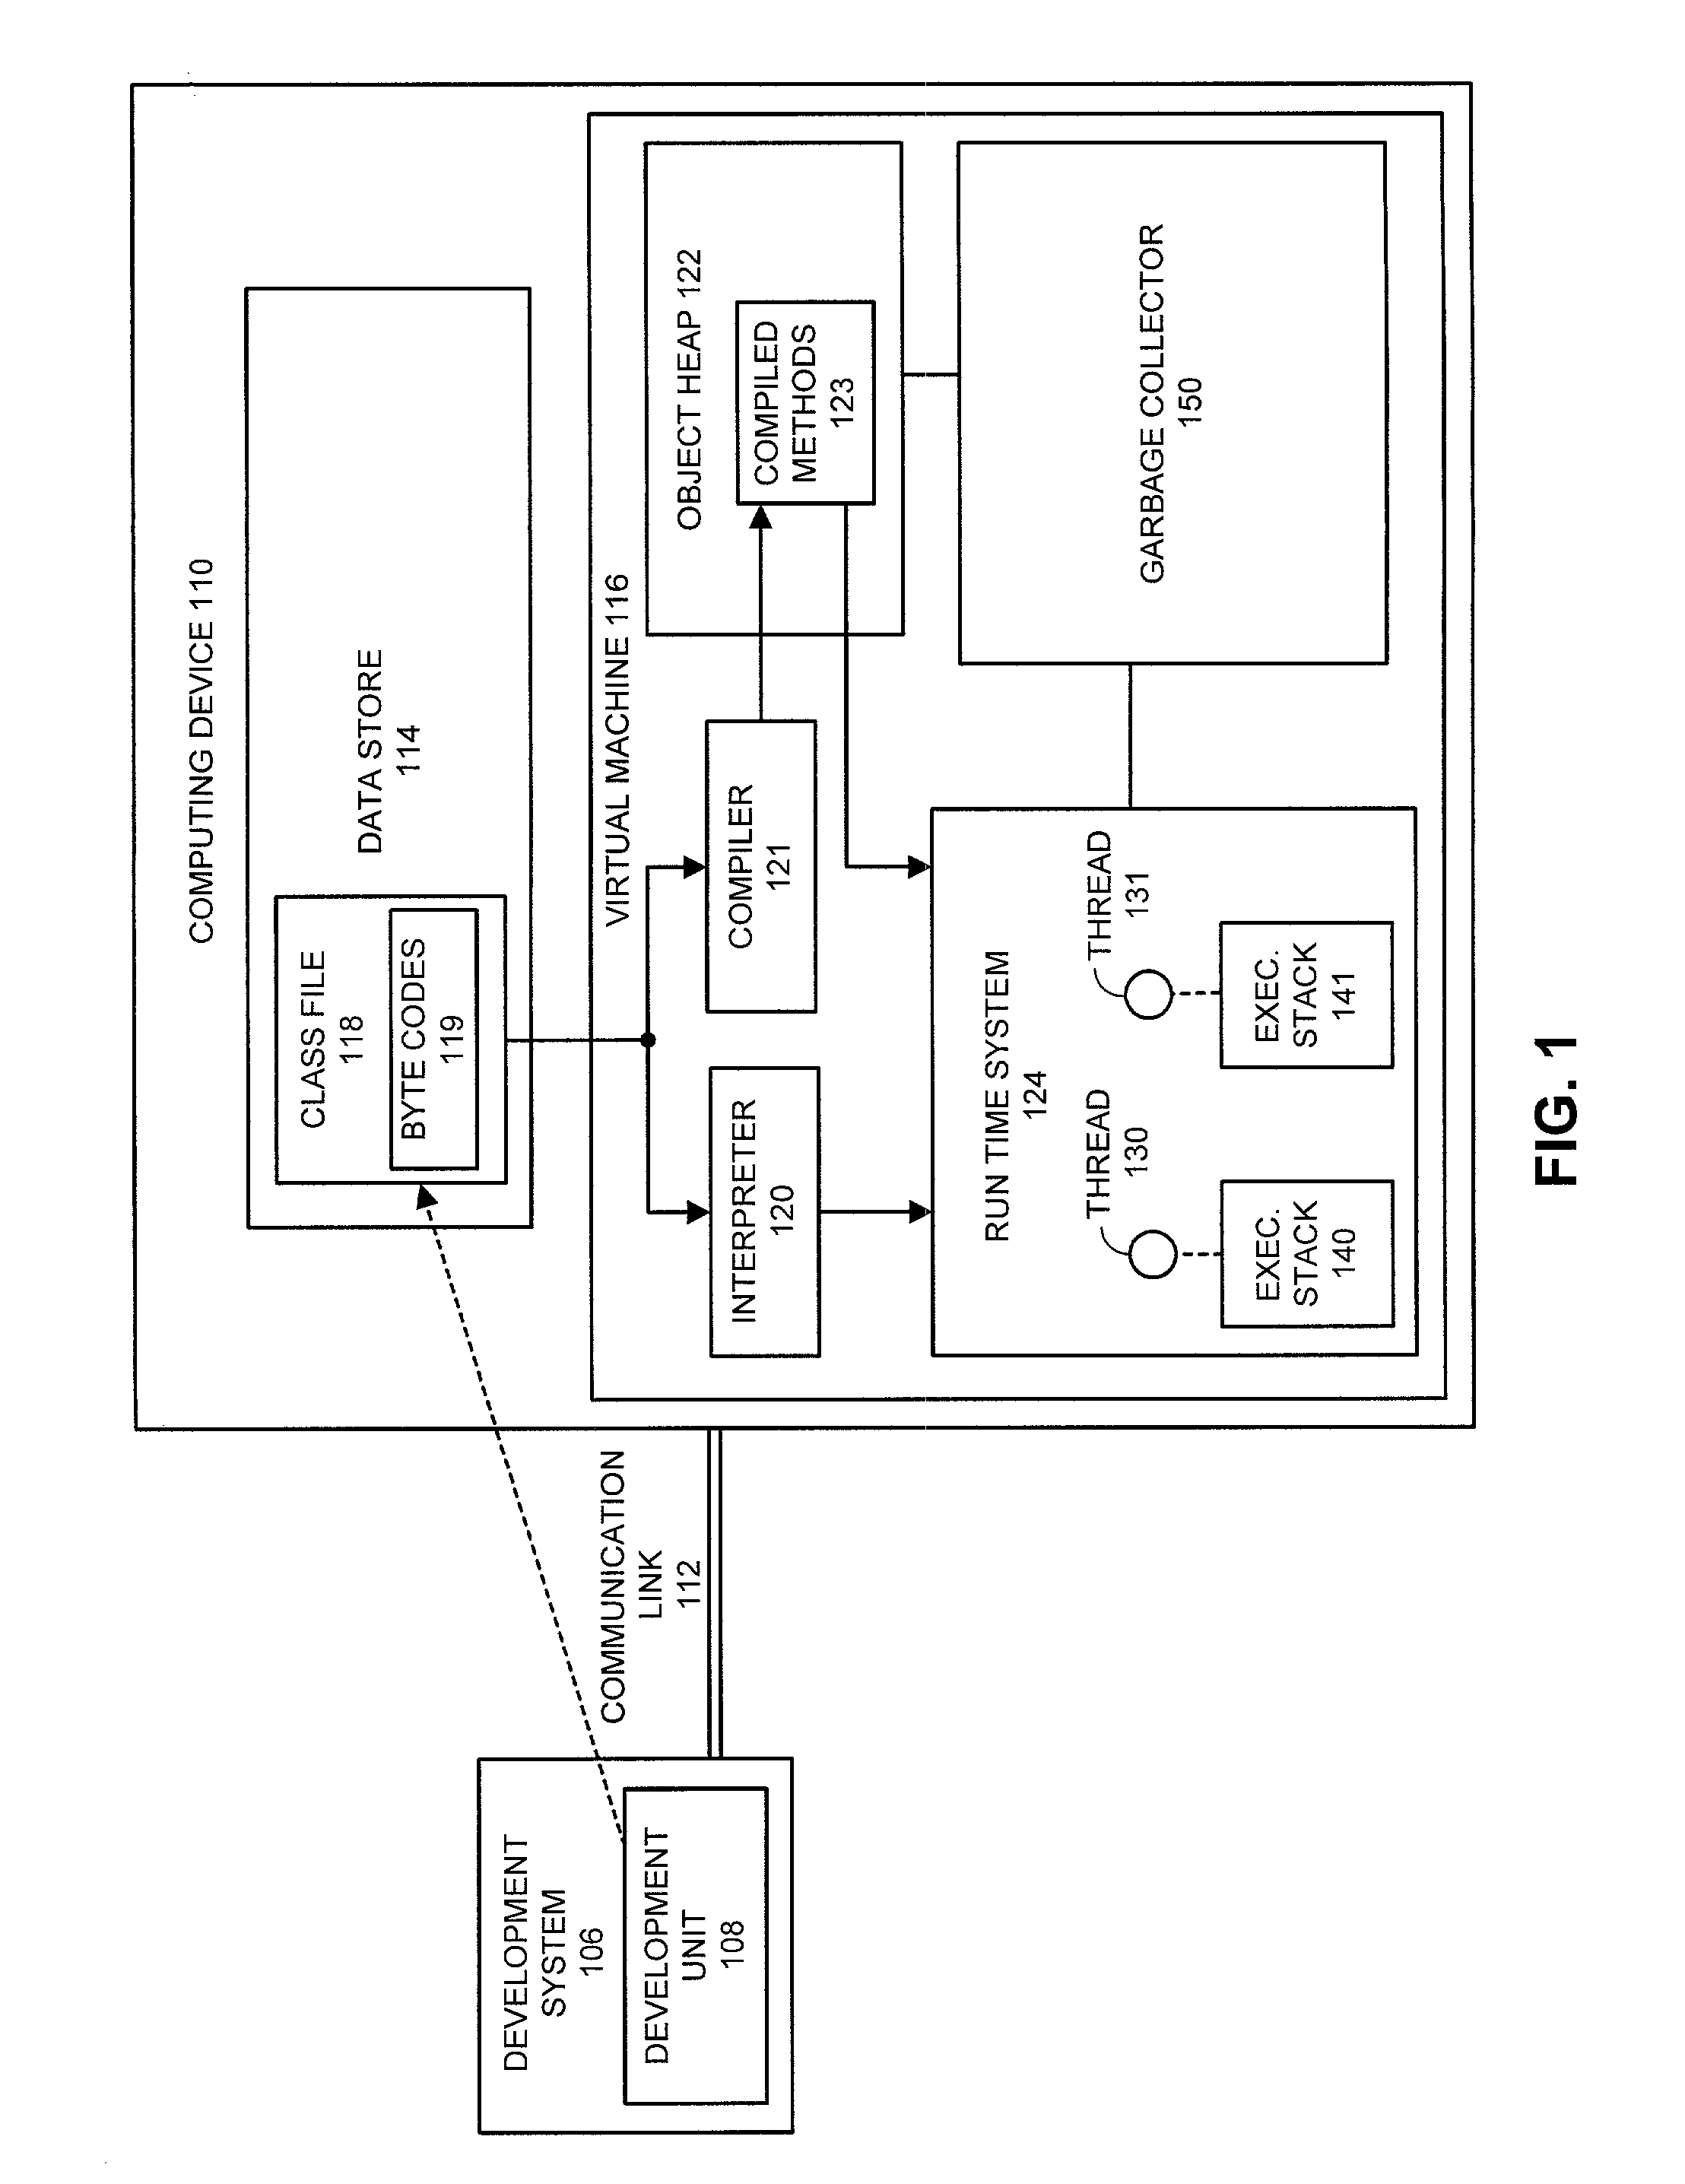 Method and apparatus for dynamically compiling byte codes into native code